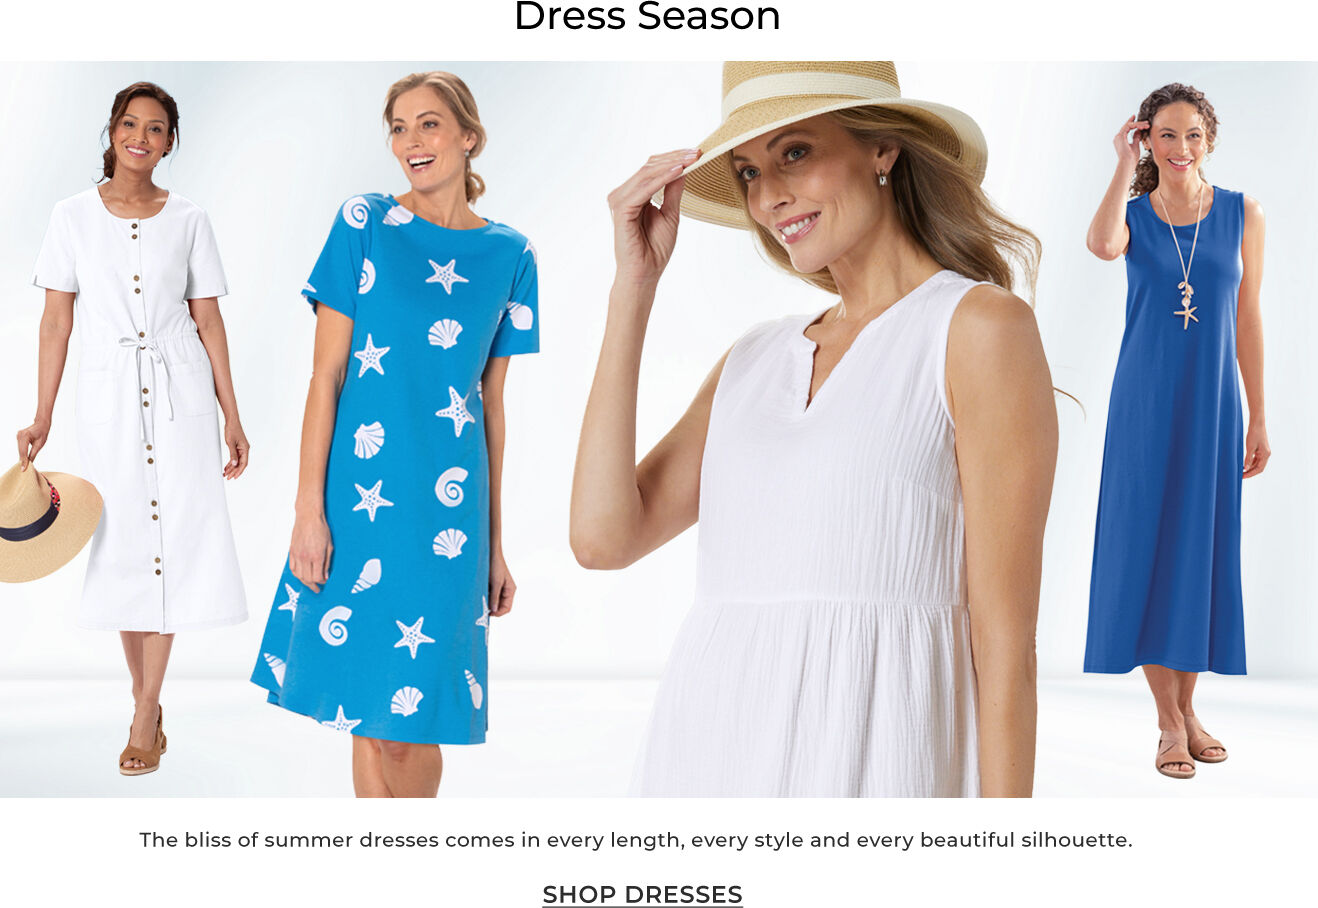 dress season the bliss of summer dresses comes in every length, every style and every beautiful silhouette. shop dresses